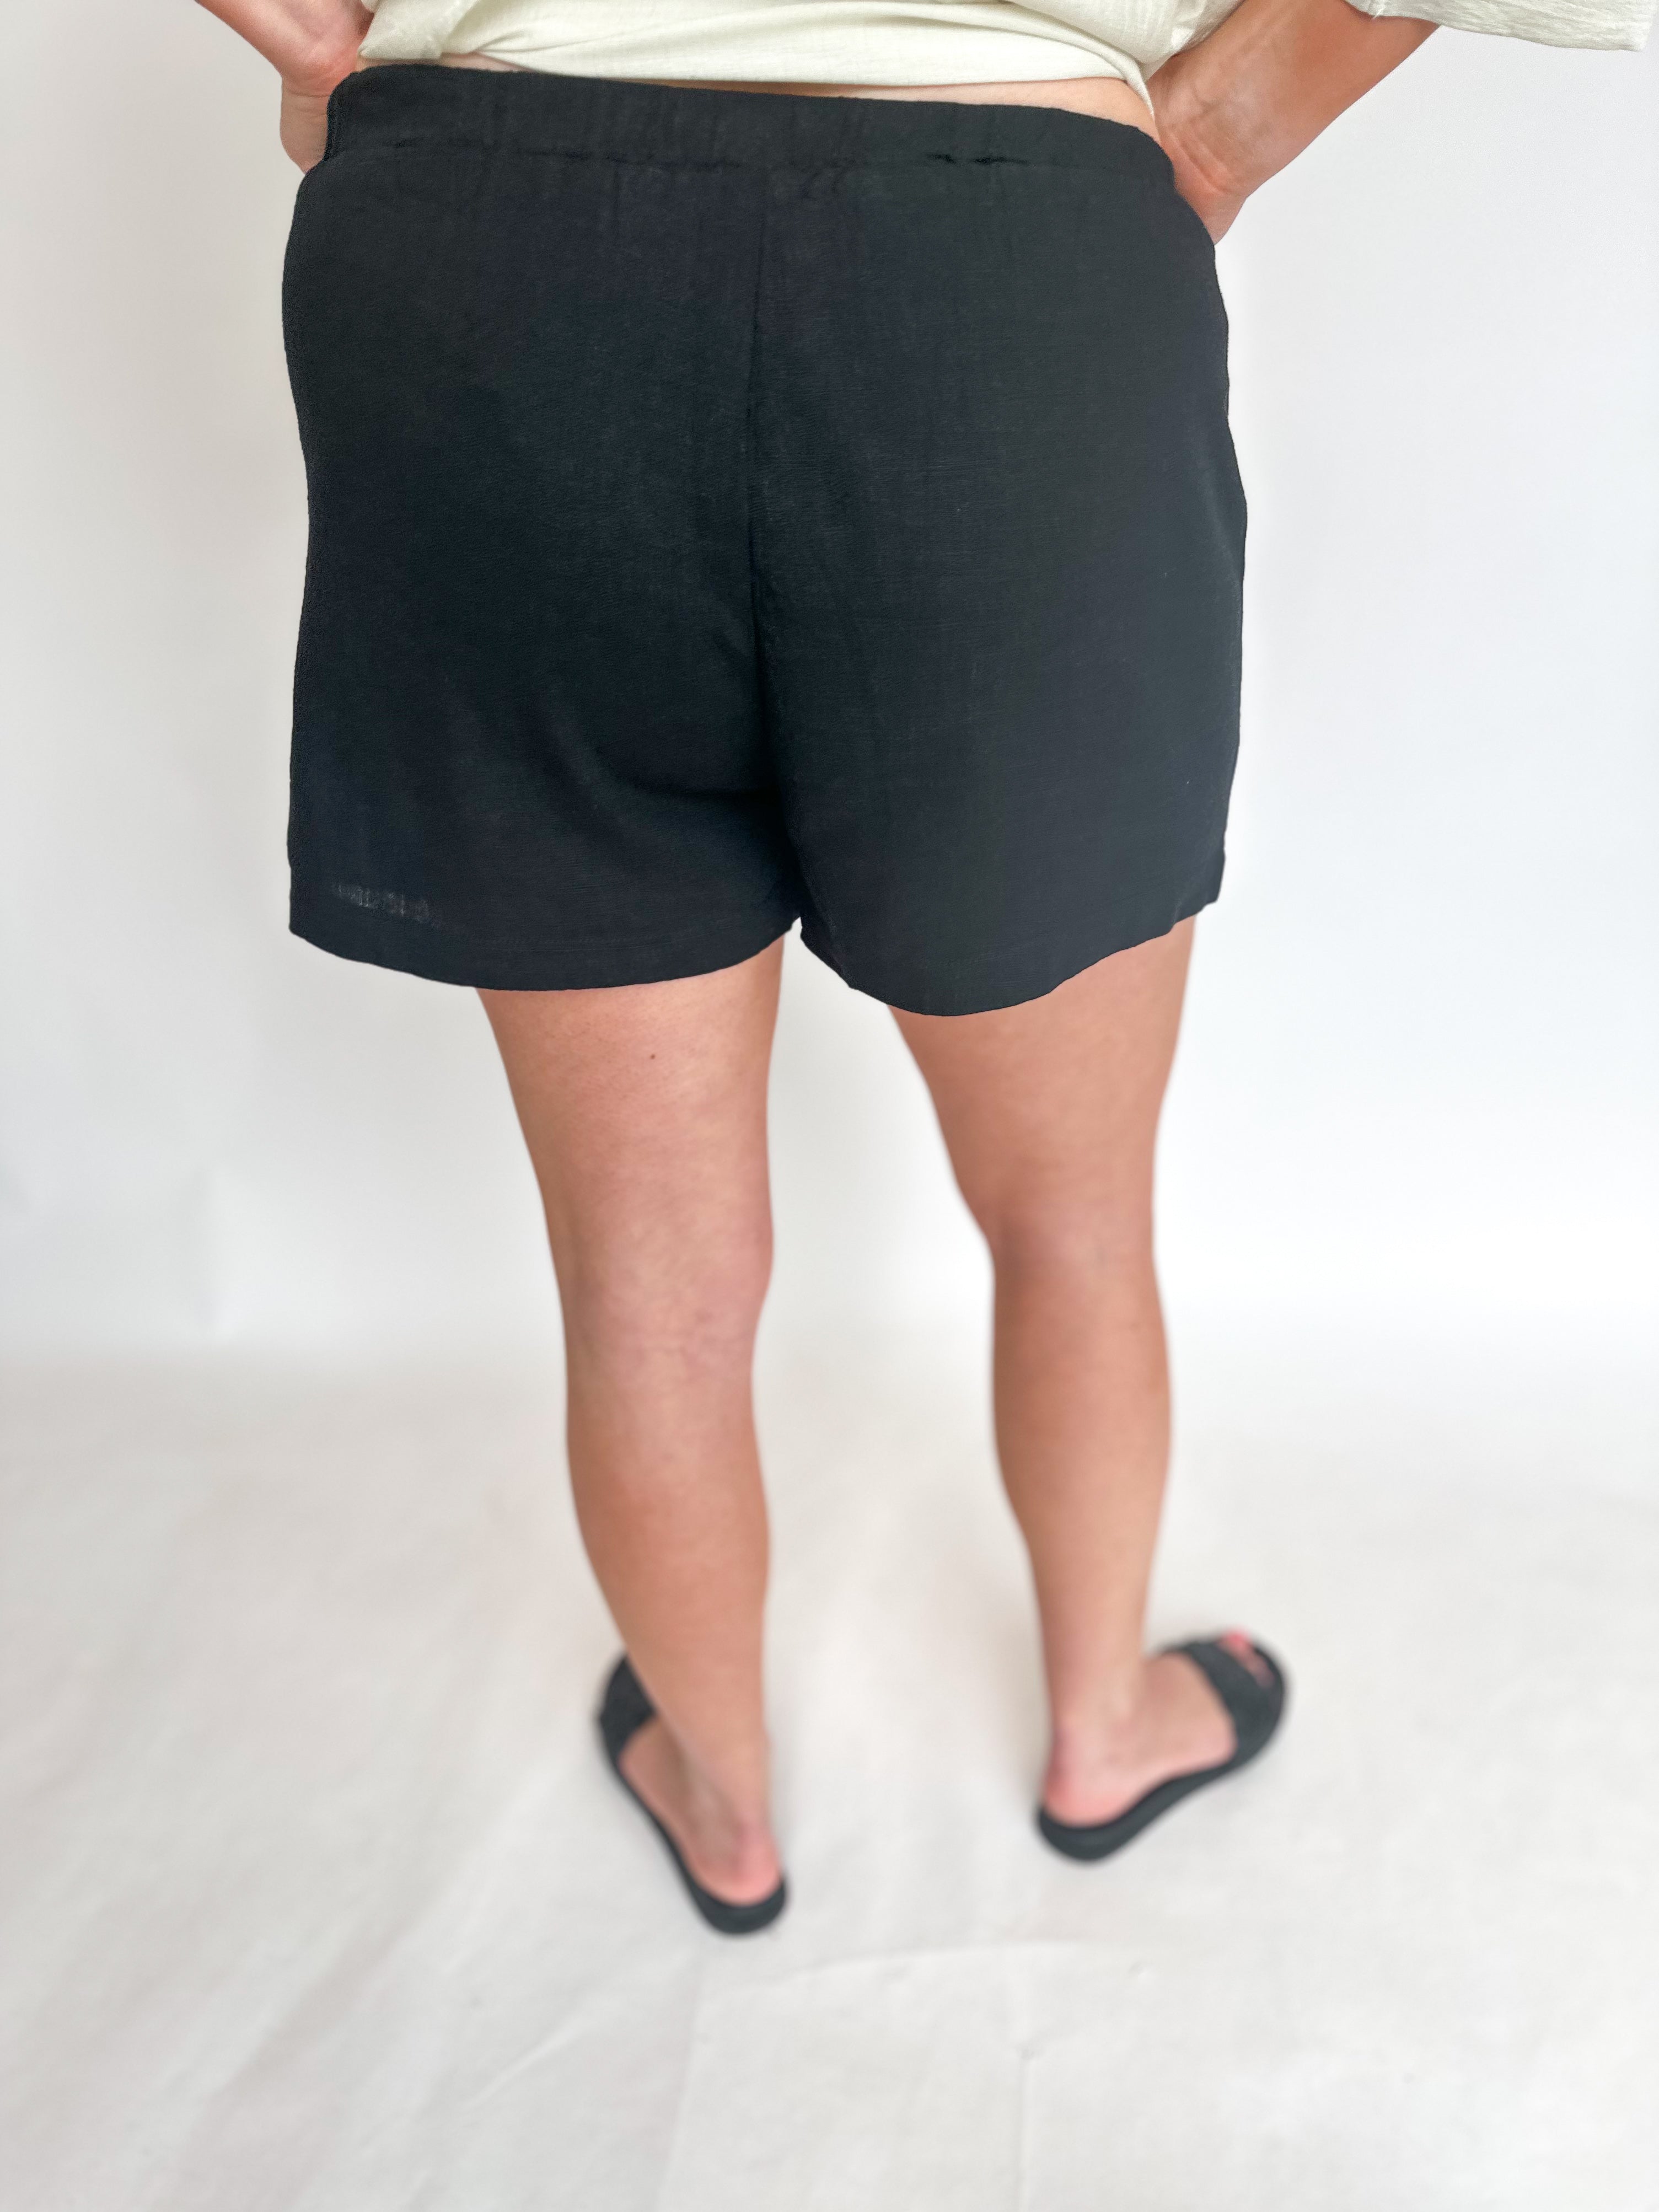 Slouchy Pocket Beach Shorts-410 Shorts/Skirts-ALLIE ROSE-July & June Women's Fashion Boutique Located in San Antonio, Texas